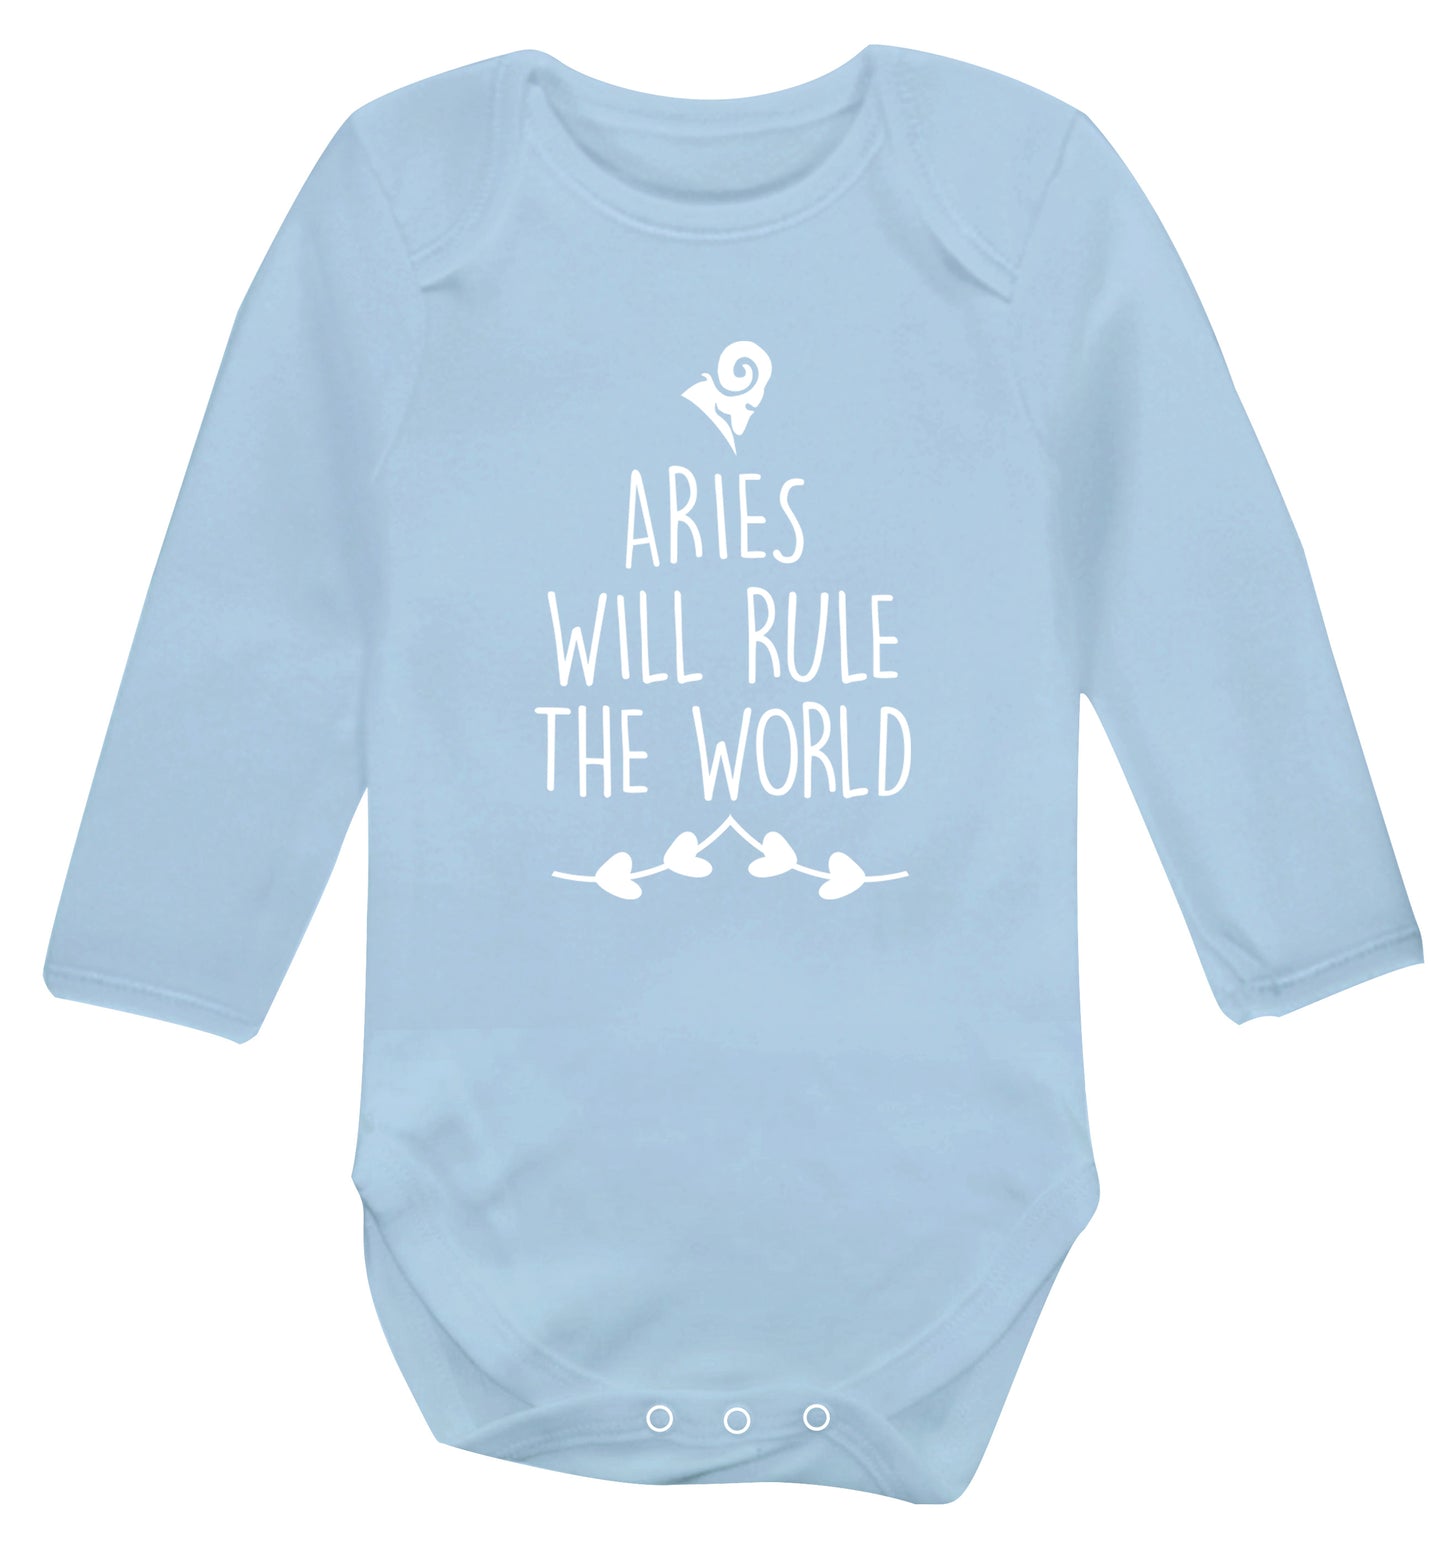 Aries will rule the world Baby Vest long sleeved pale blue 6-12 months